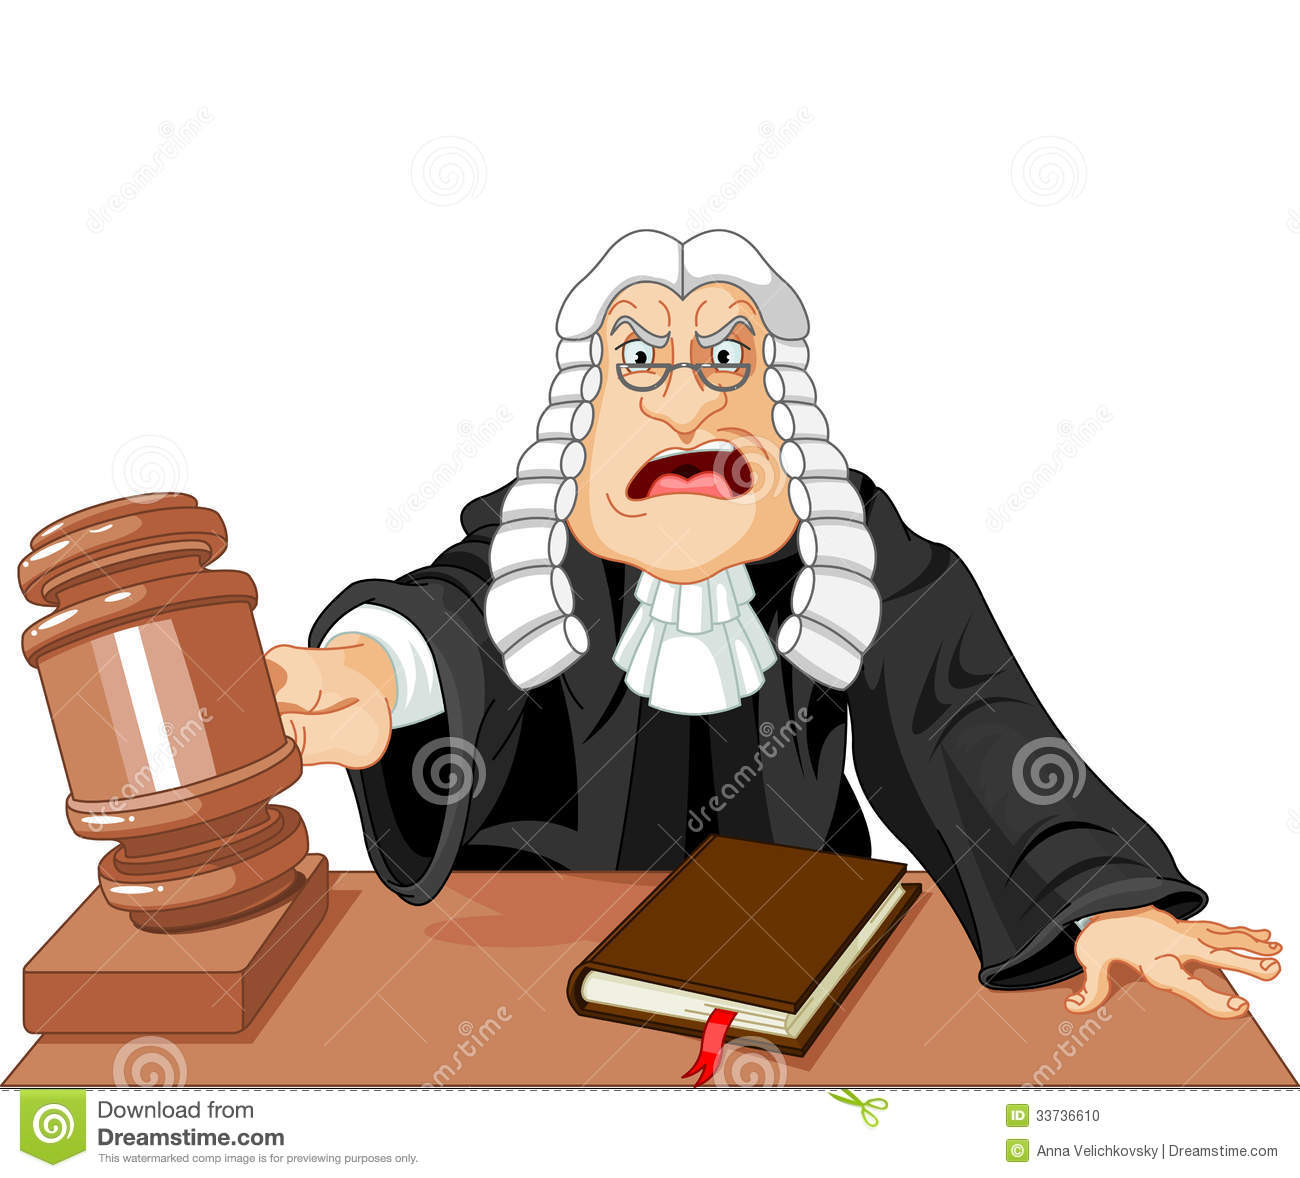 Cartoon Judge With Gavel Images   Pictures   Becuo